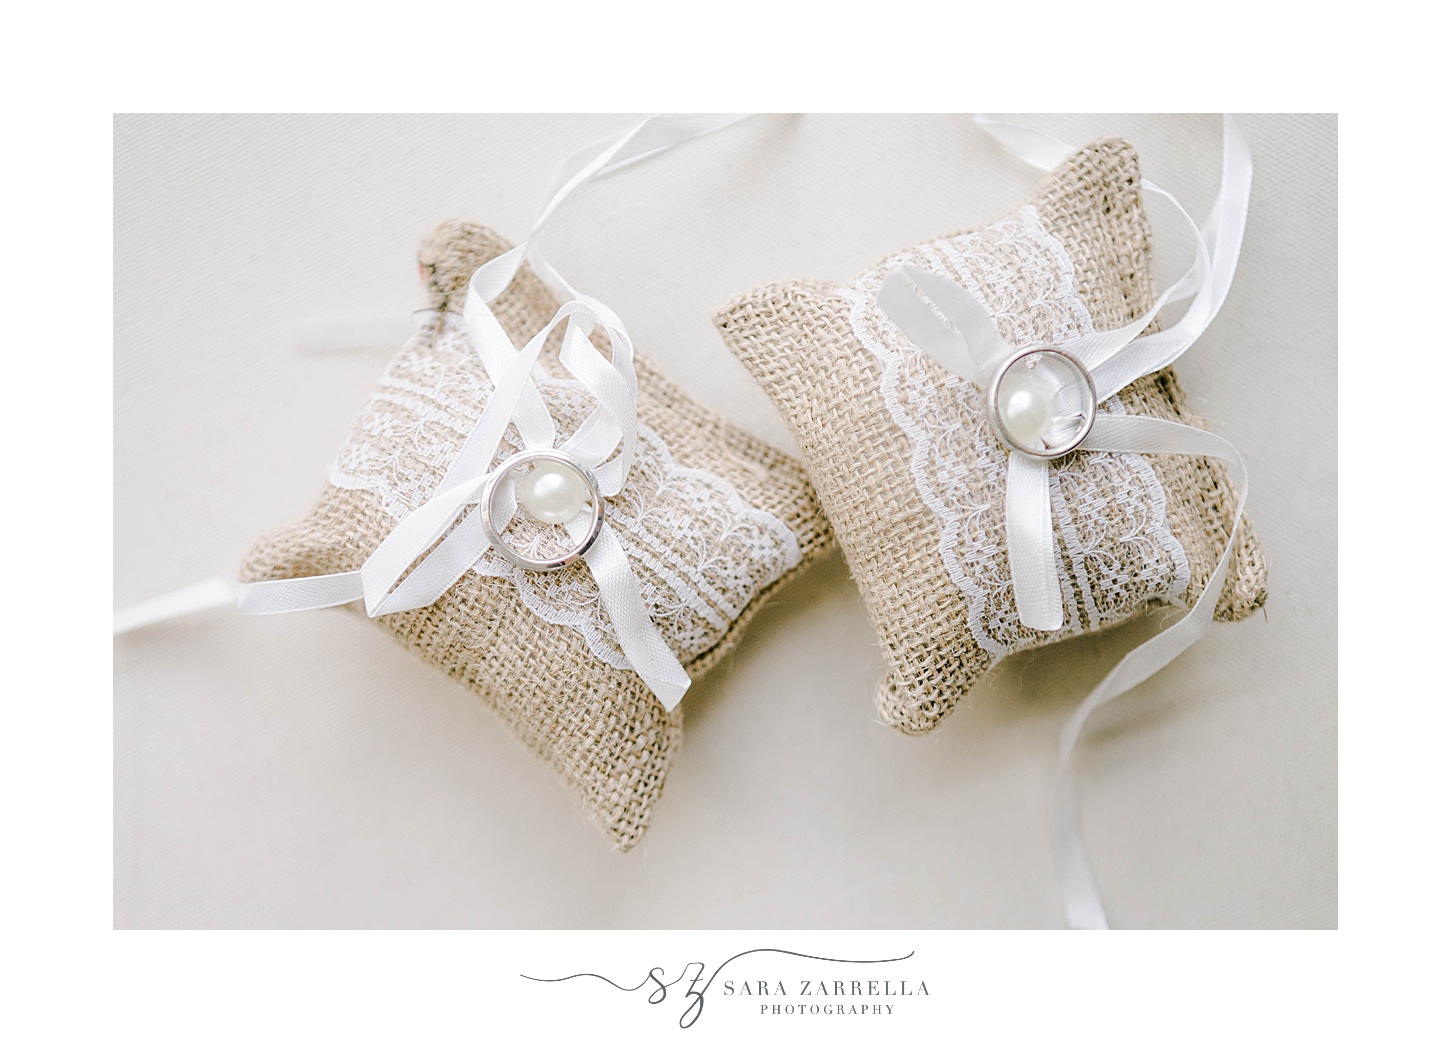 rings rest on burlap pillow with lace